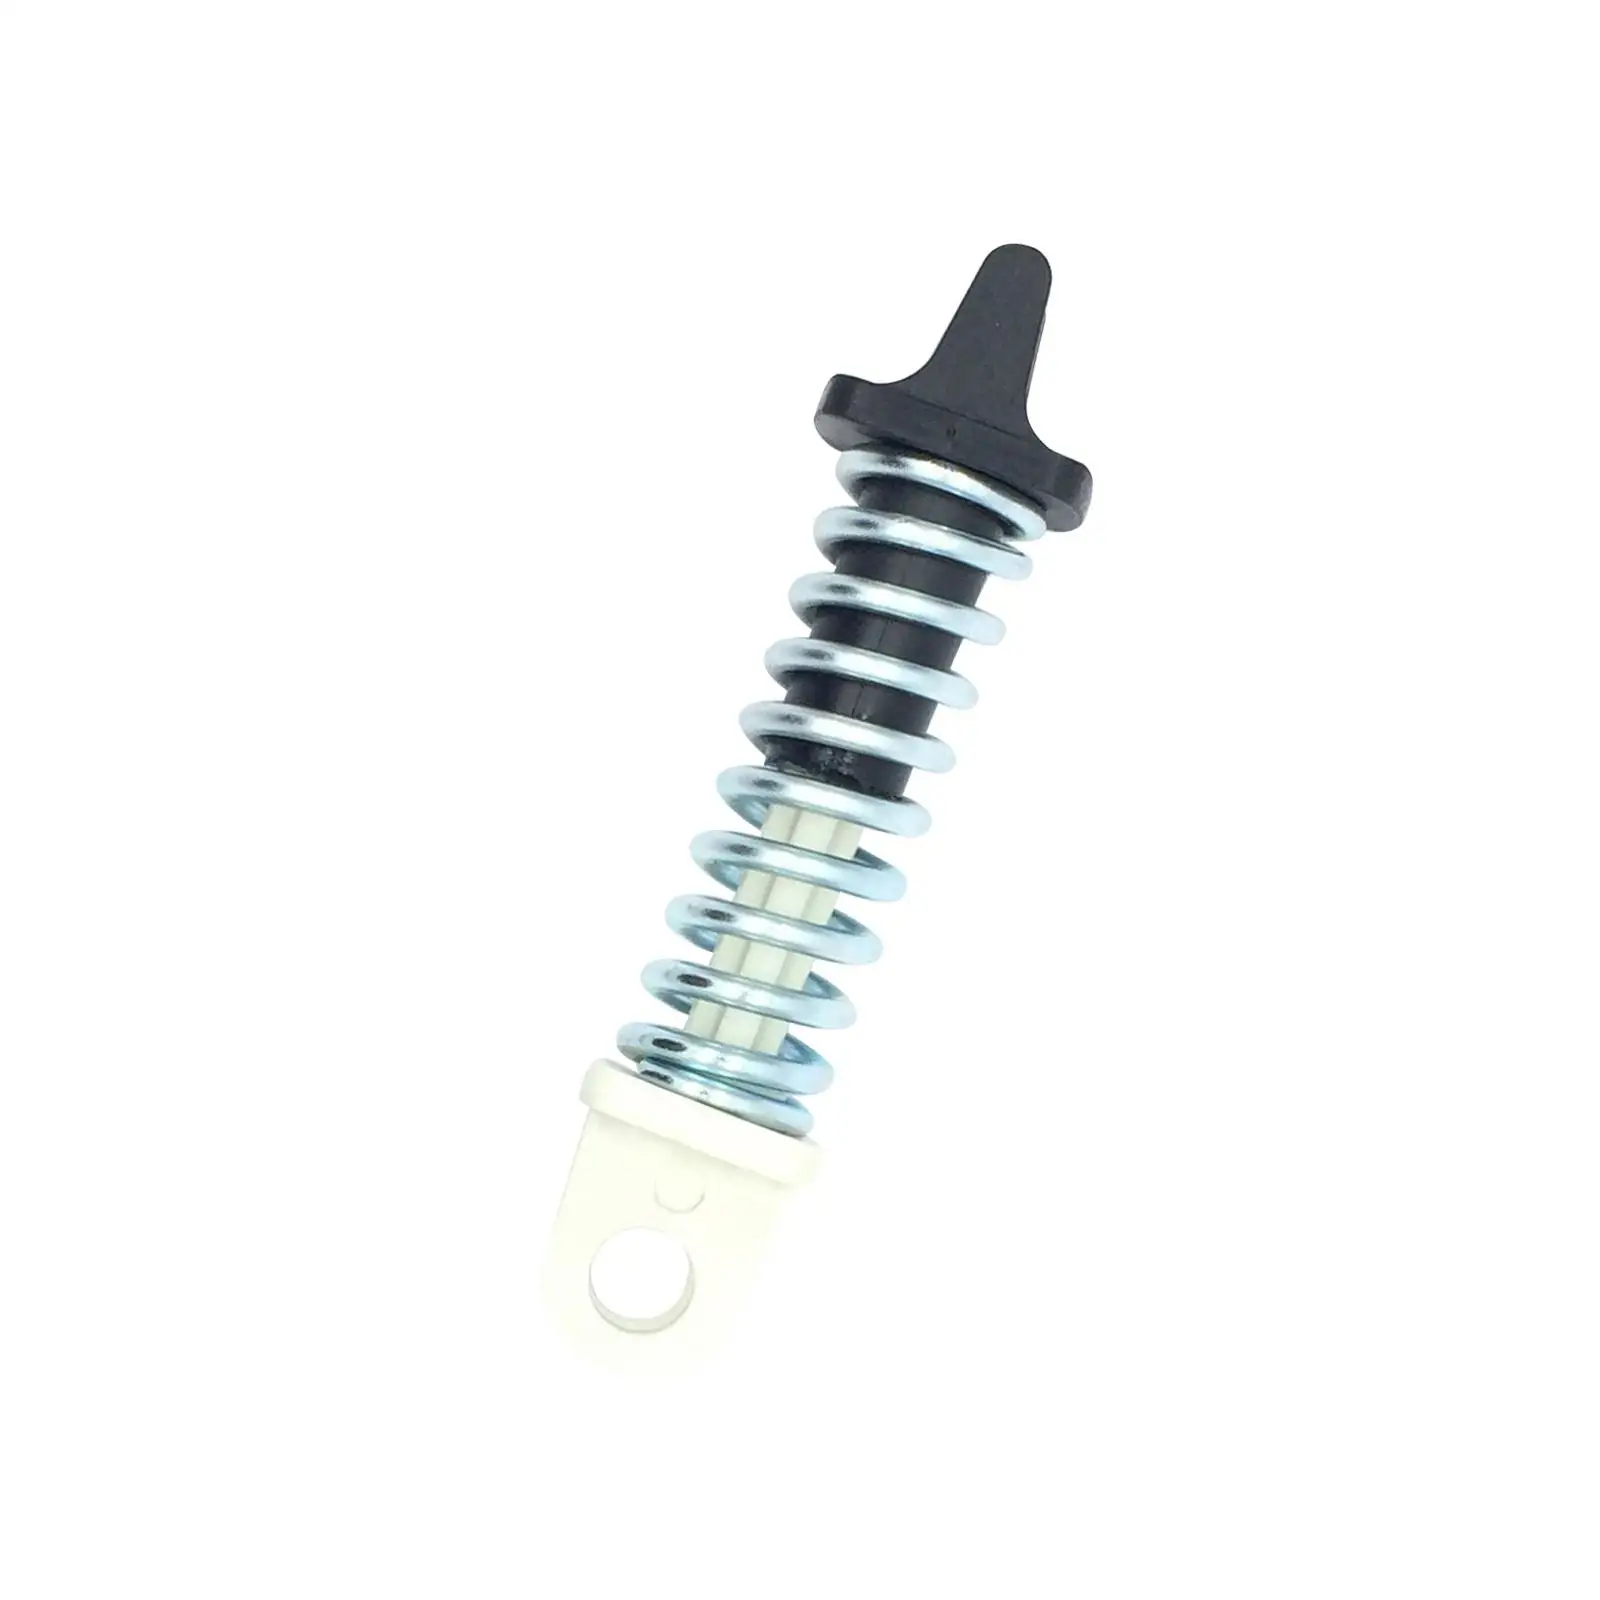 Clutch Pedal Assist Spring Replace Parts 4658700qab 77 01 208 109 7701208109 for Vauxhall Vivaro A 2001-2014 Auto Accessory